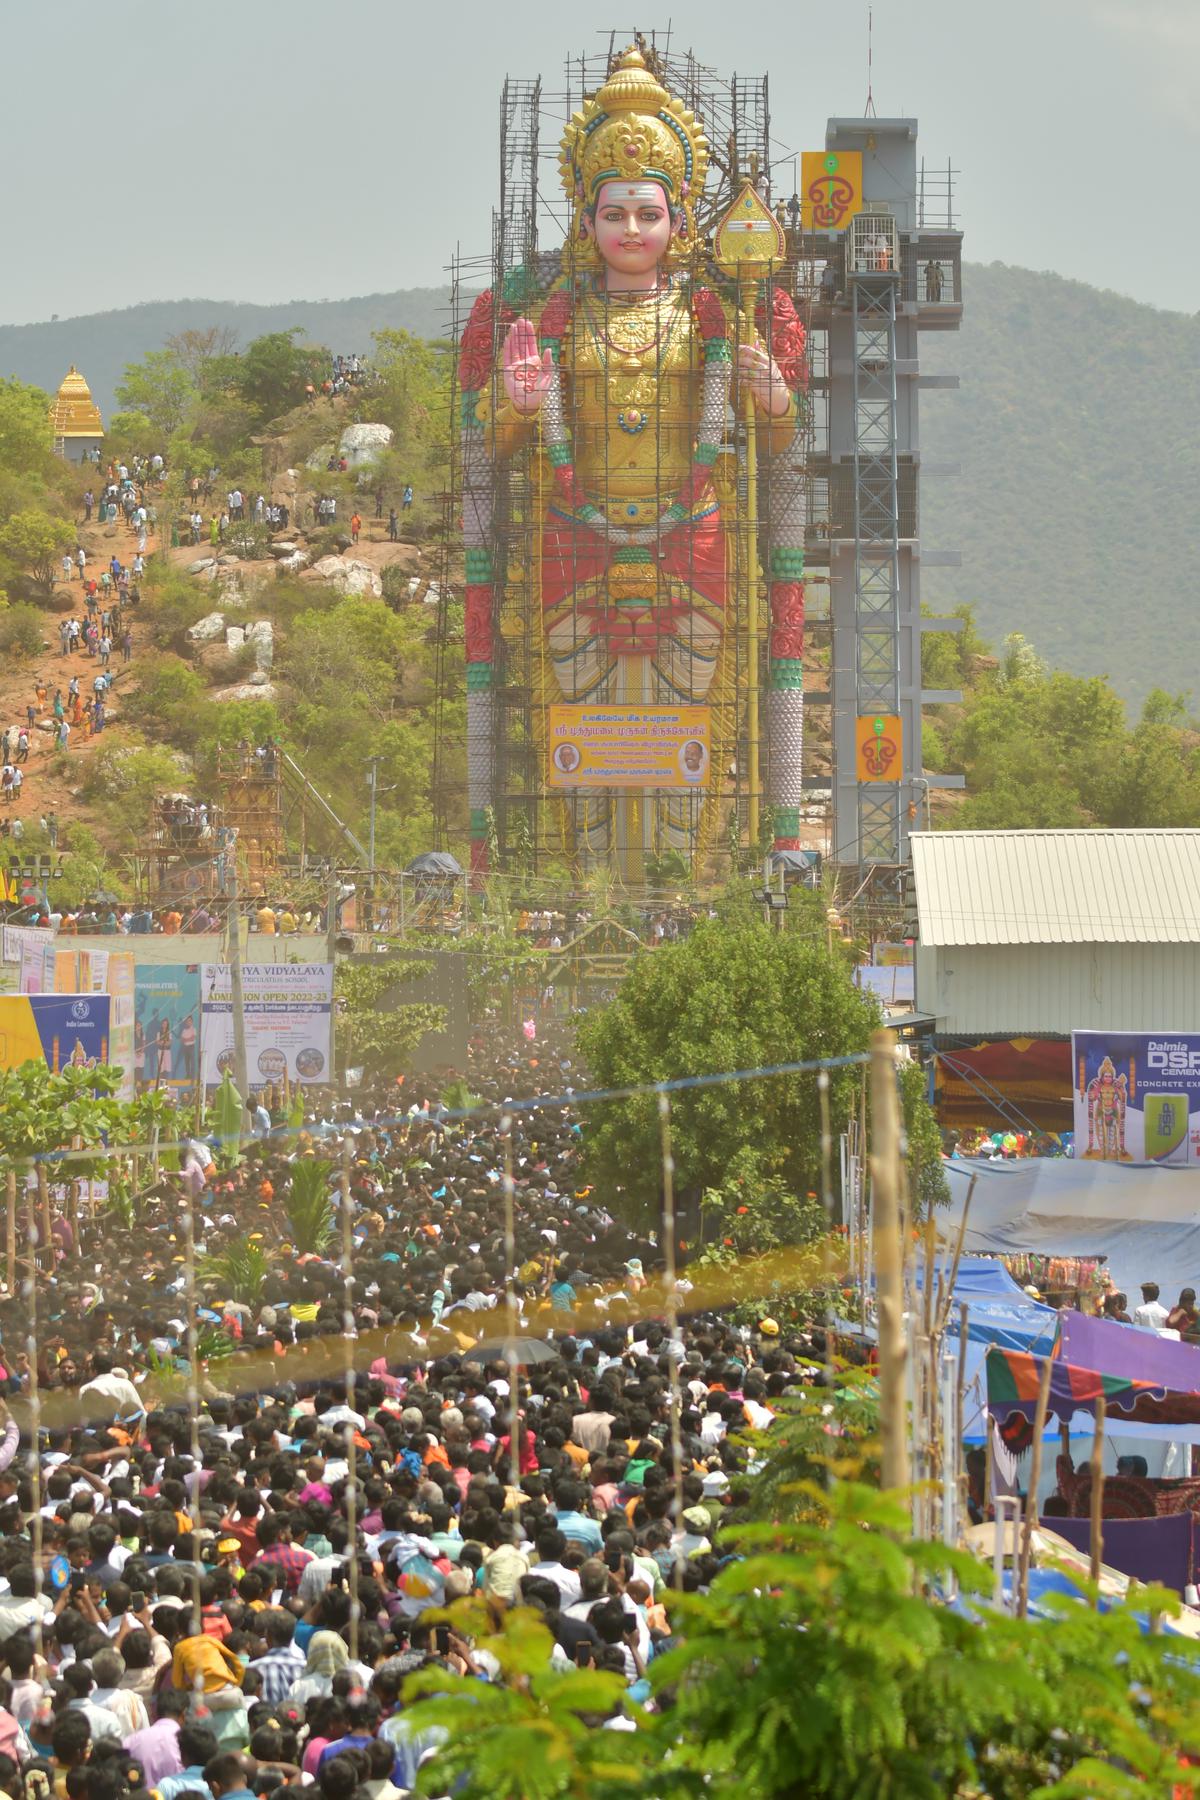 146-foot tall idol of Lord Murugan consecrated in Salem district - The